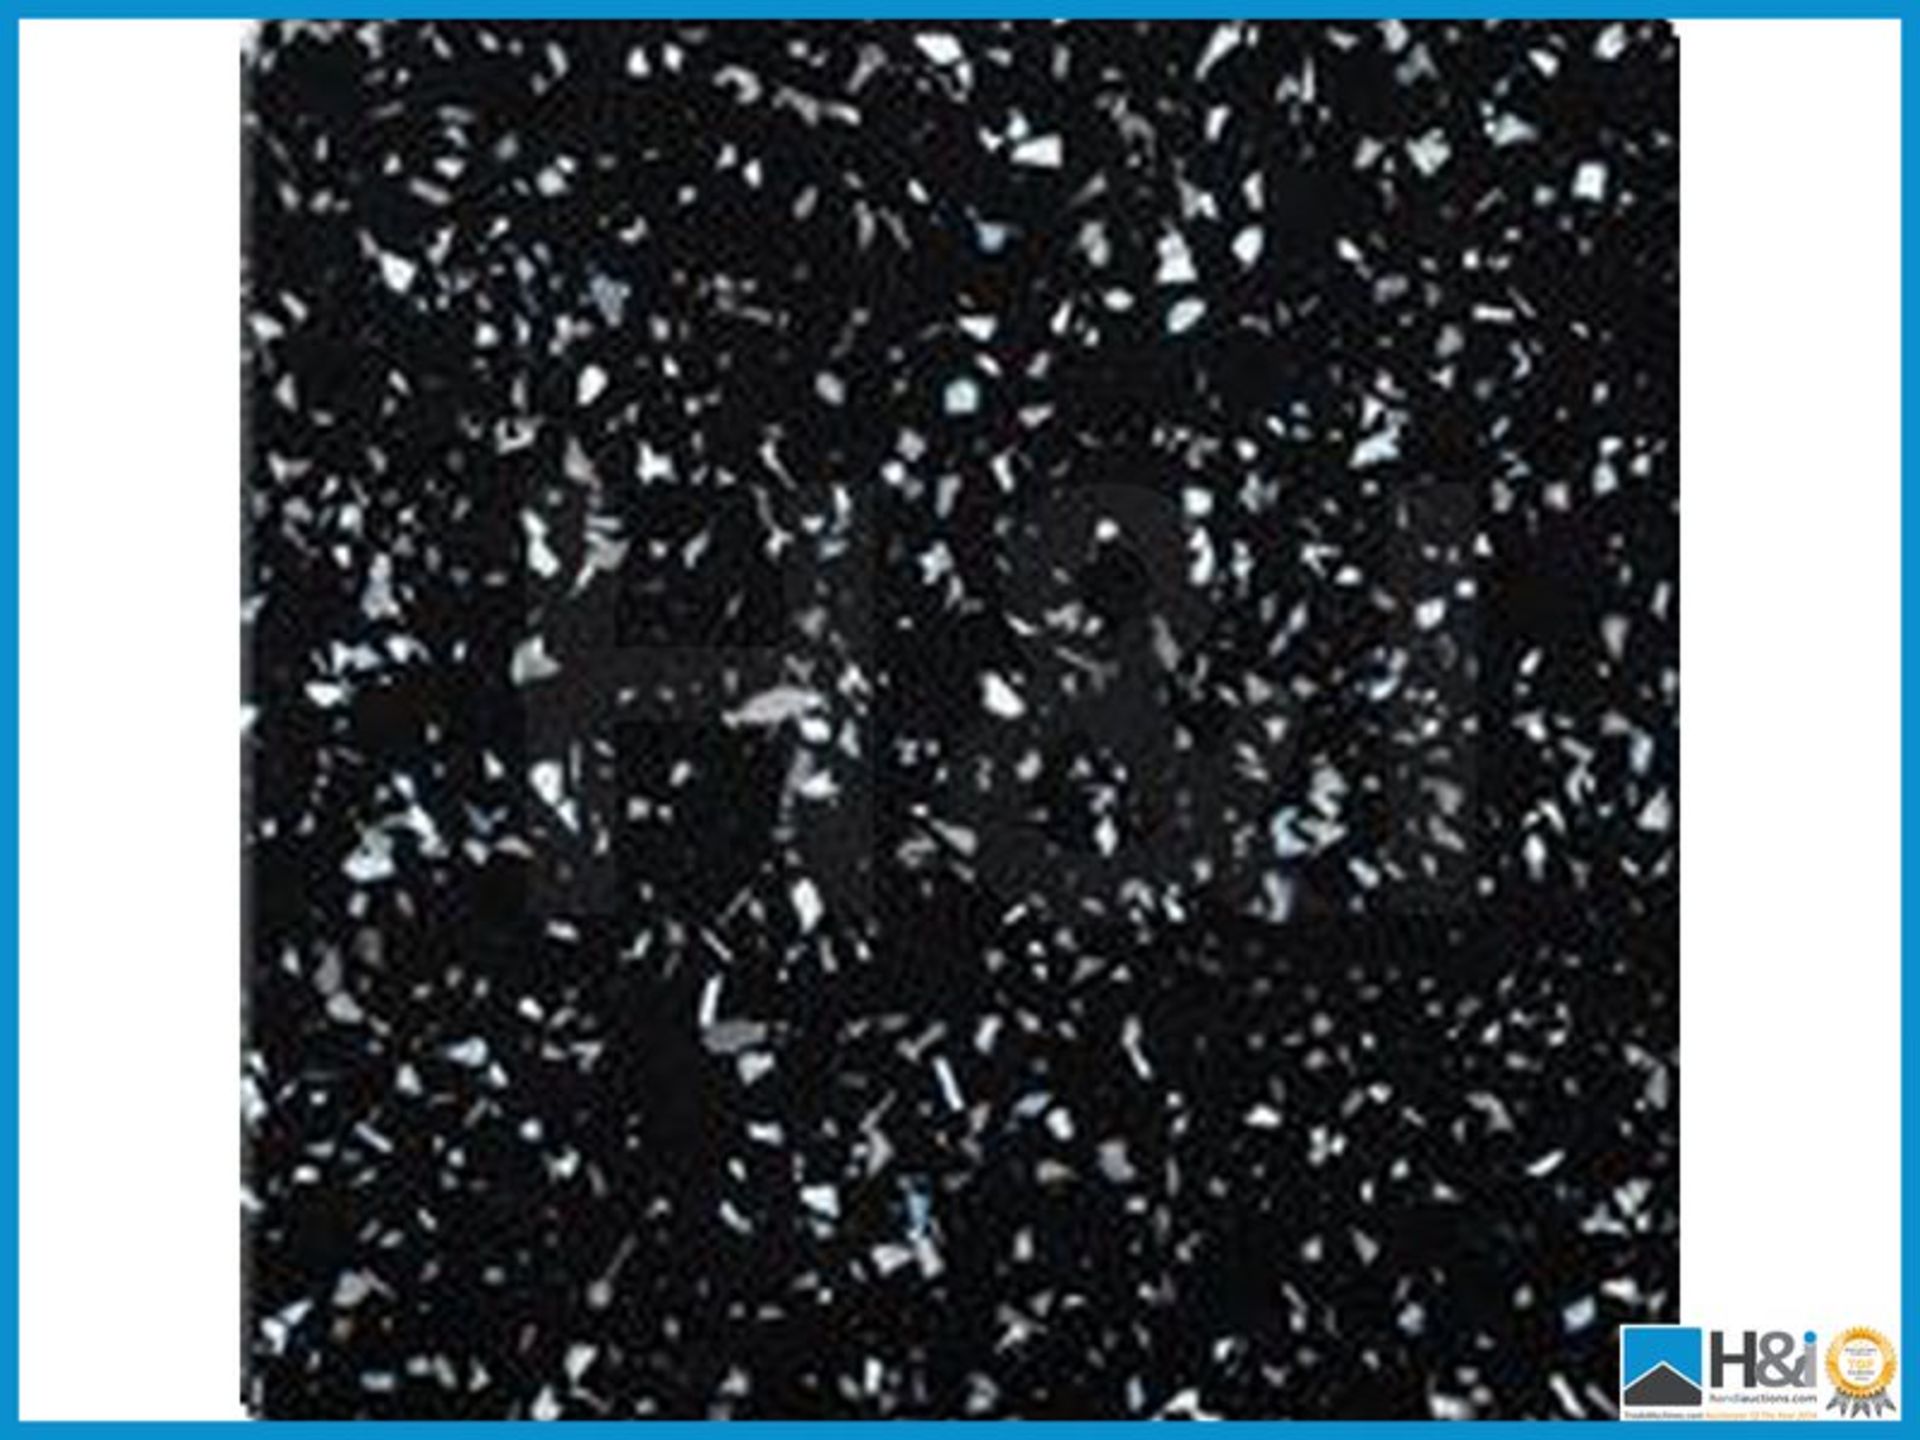 Shower wet wall panels 2400mmX1000mm in black galaxy sparkle RRP 189 GBP - Image 2 of 2